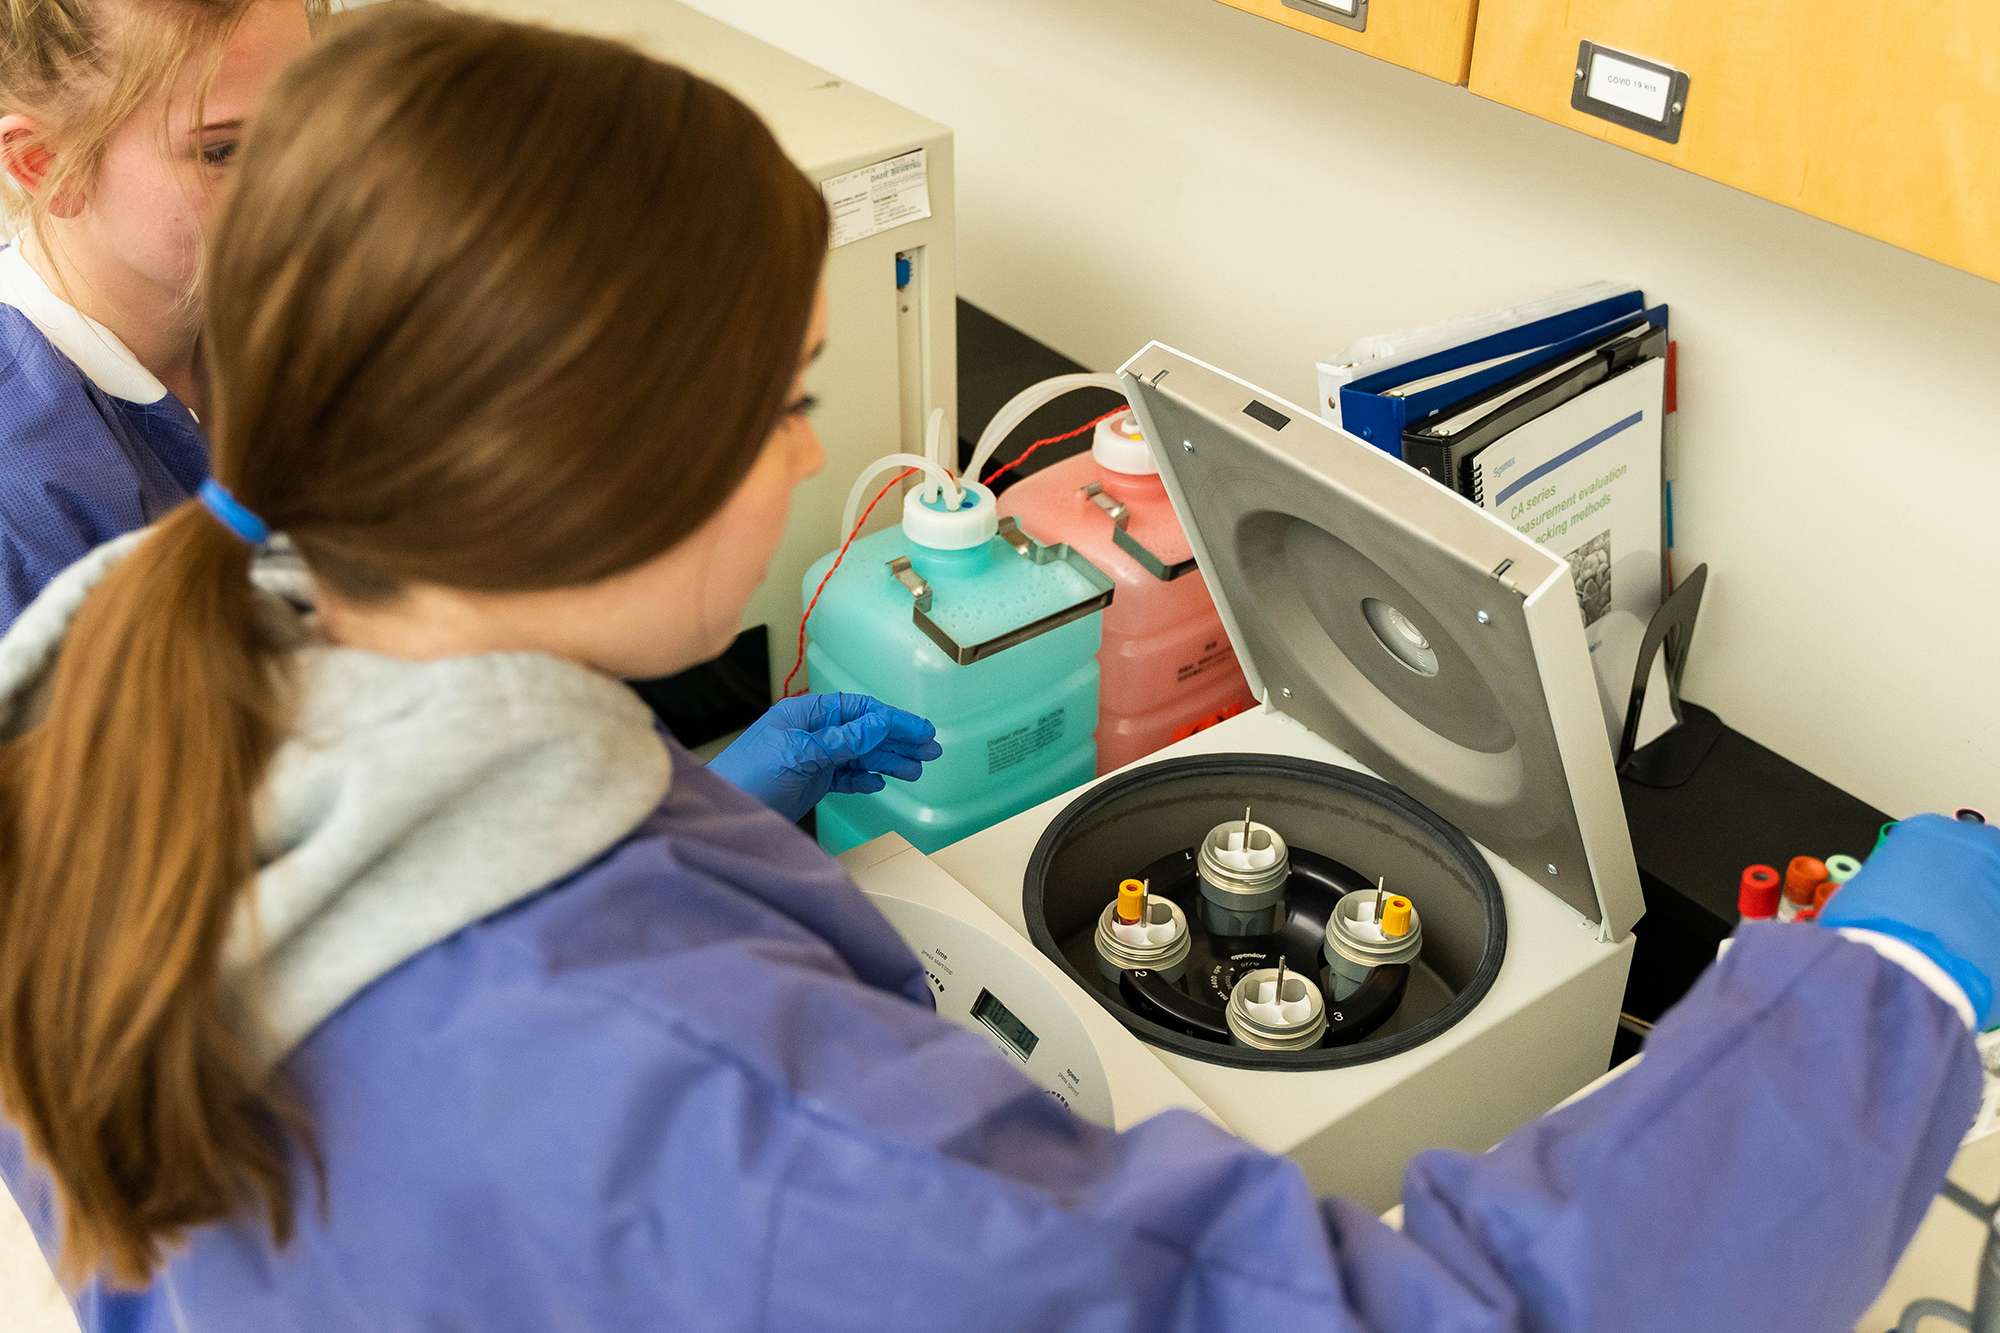 An overhead view of a Medical Assistant placing blood samples into a centrifuge machine.